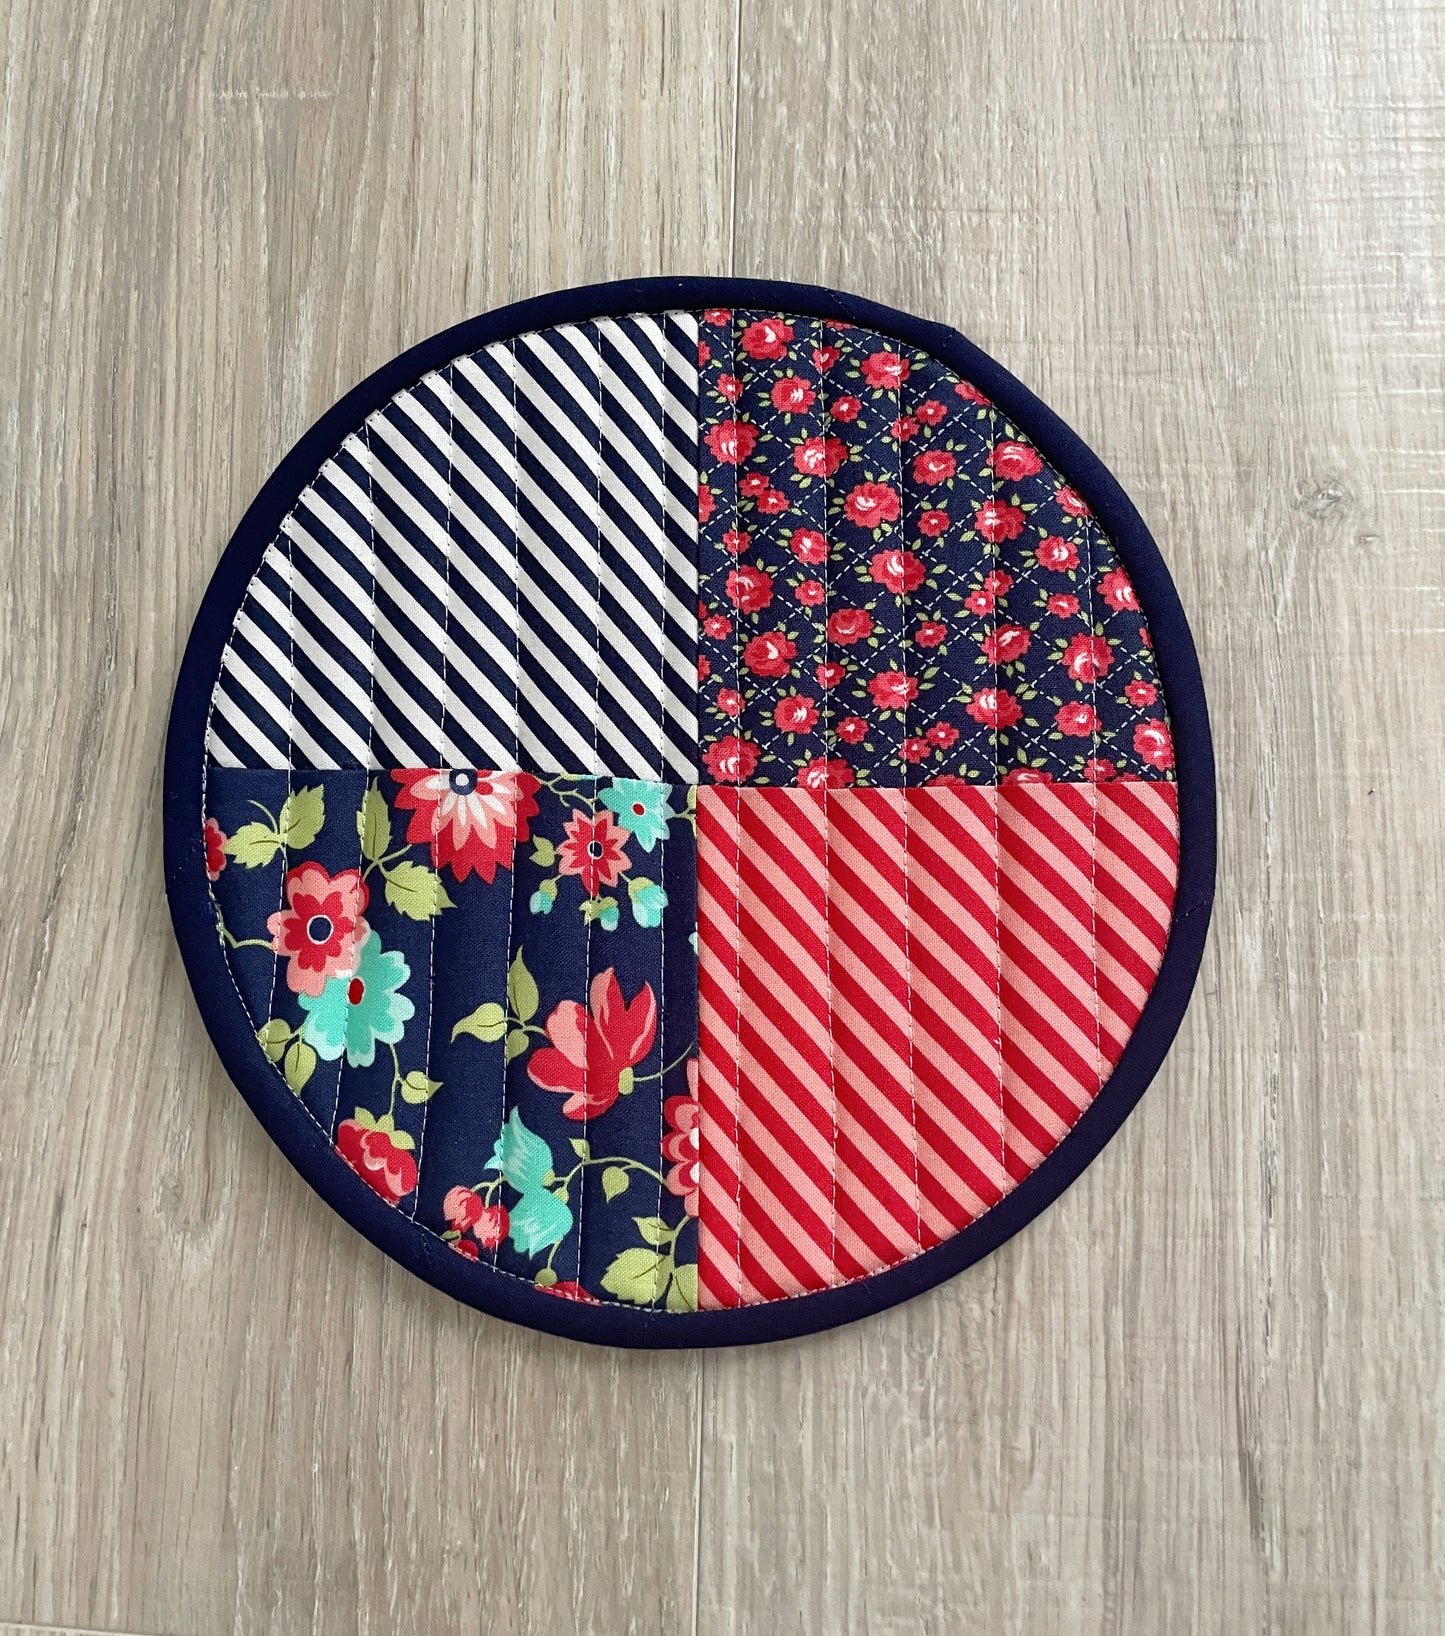 Scrappy Round Hot Pads, Set of 2 Floral Potholders